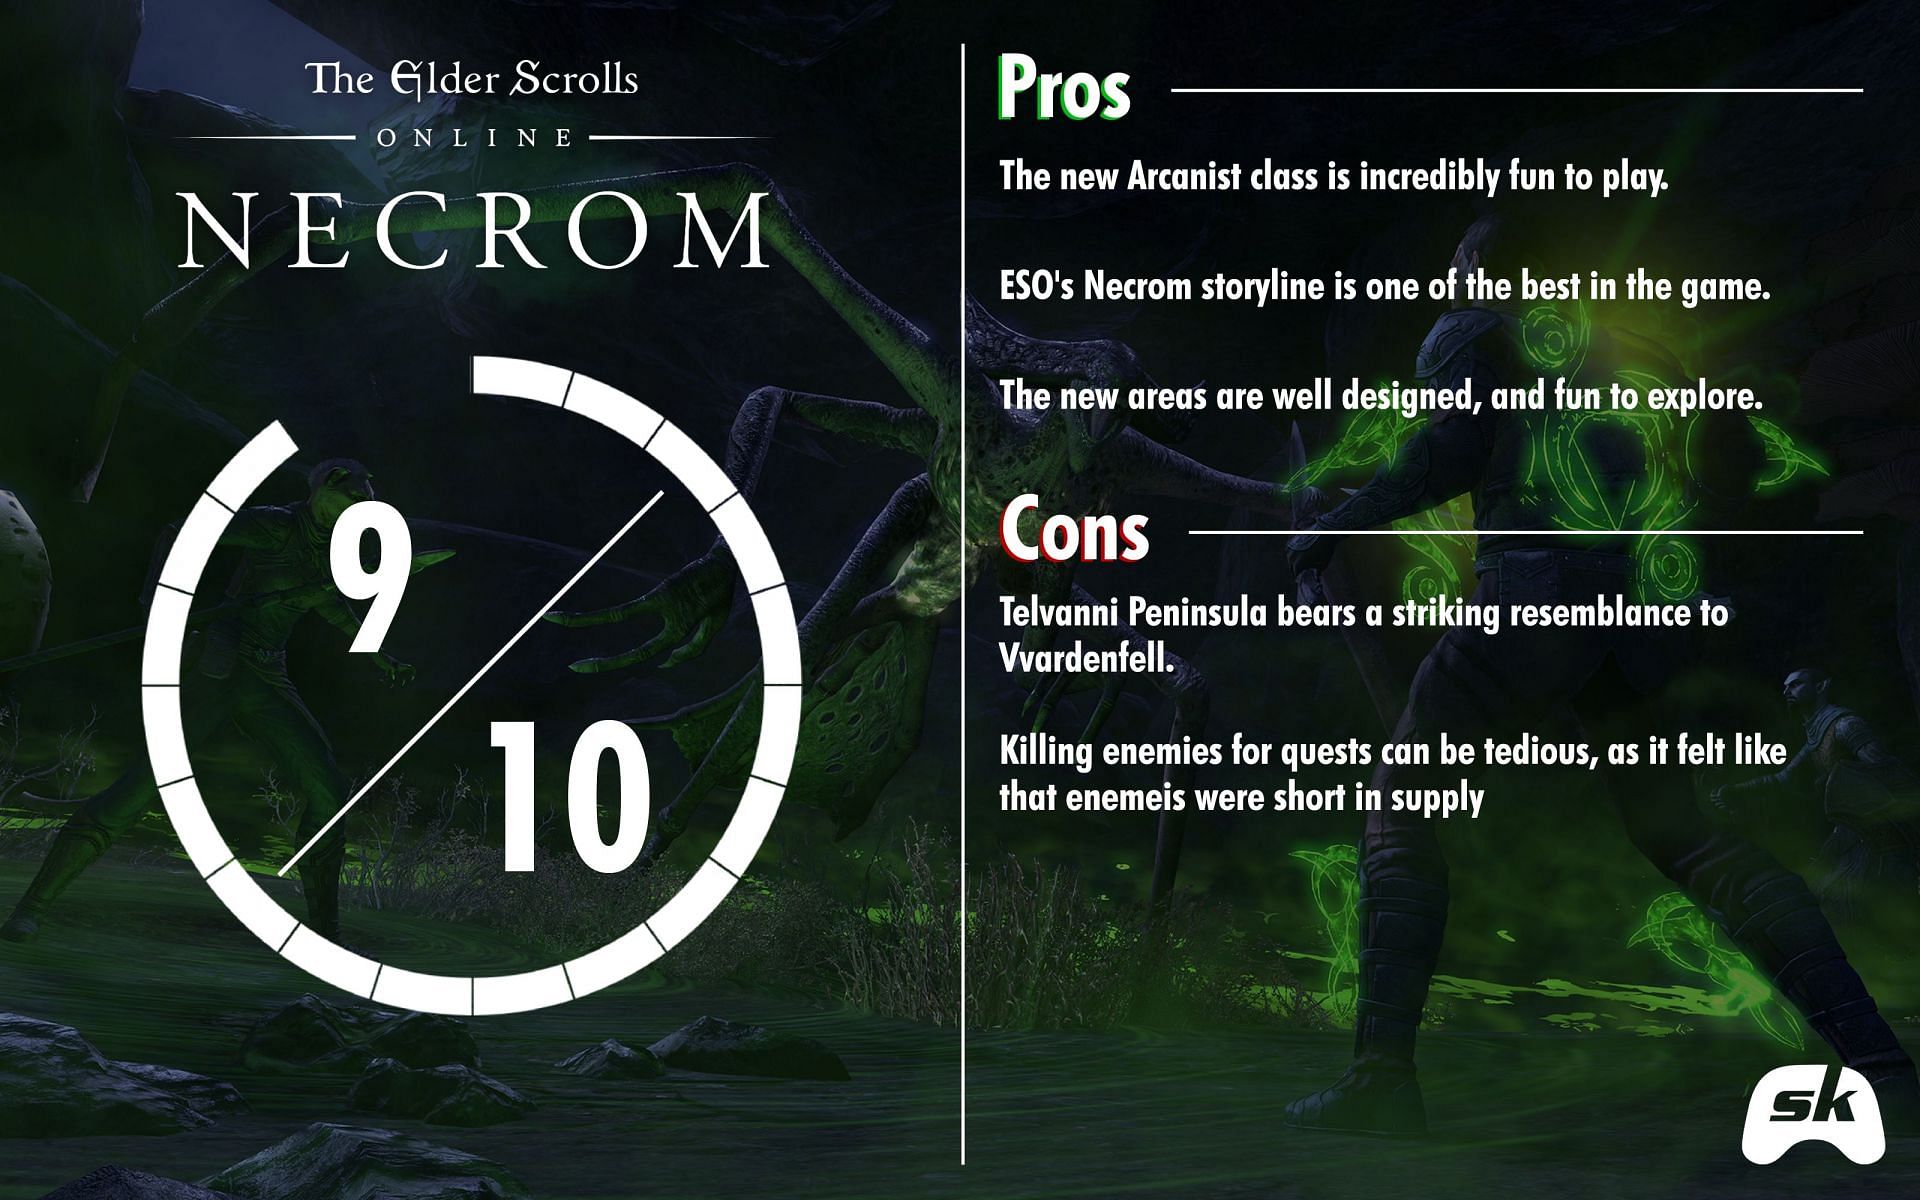 Elder Scrolls Online: Necrom carries on the tradition of rich storytelling and fun gameplay into 2023 (Image via Sportskeeda)